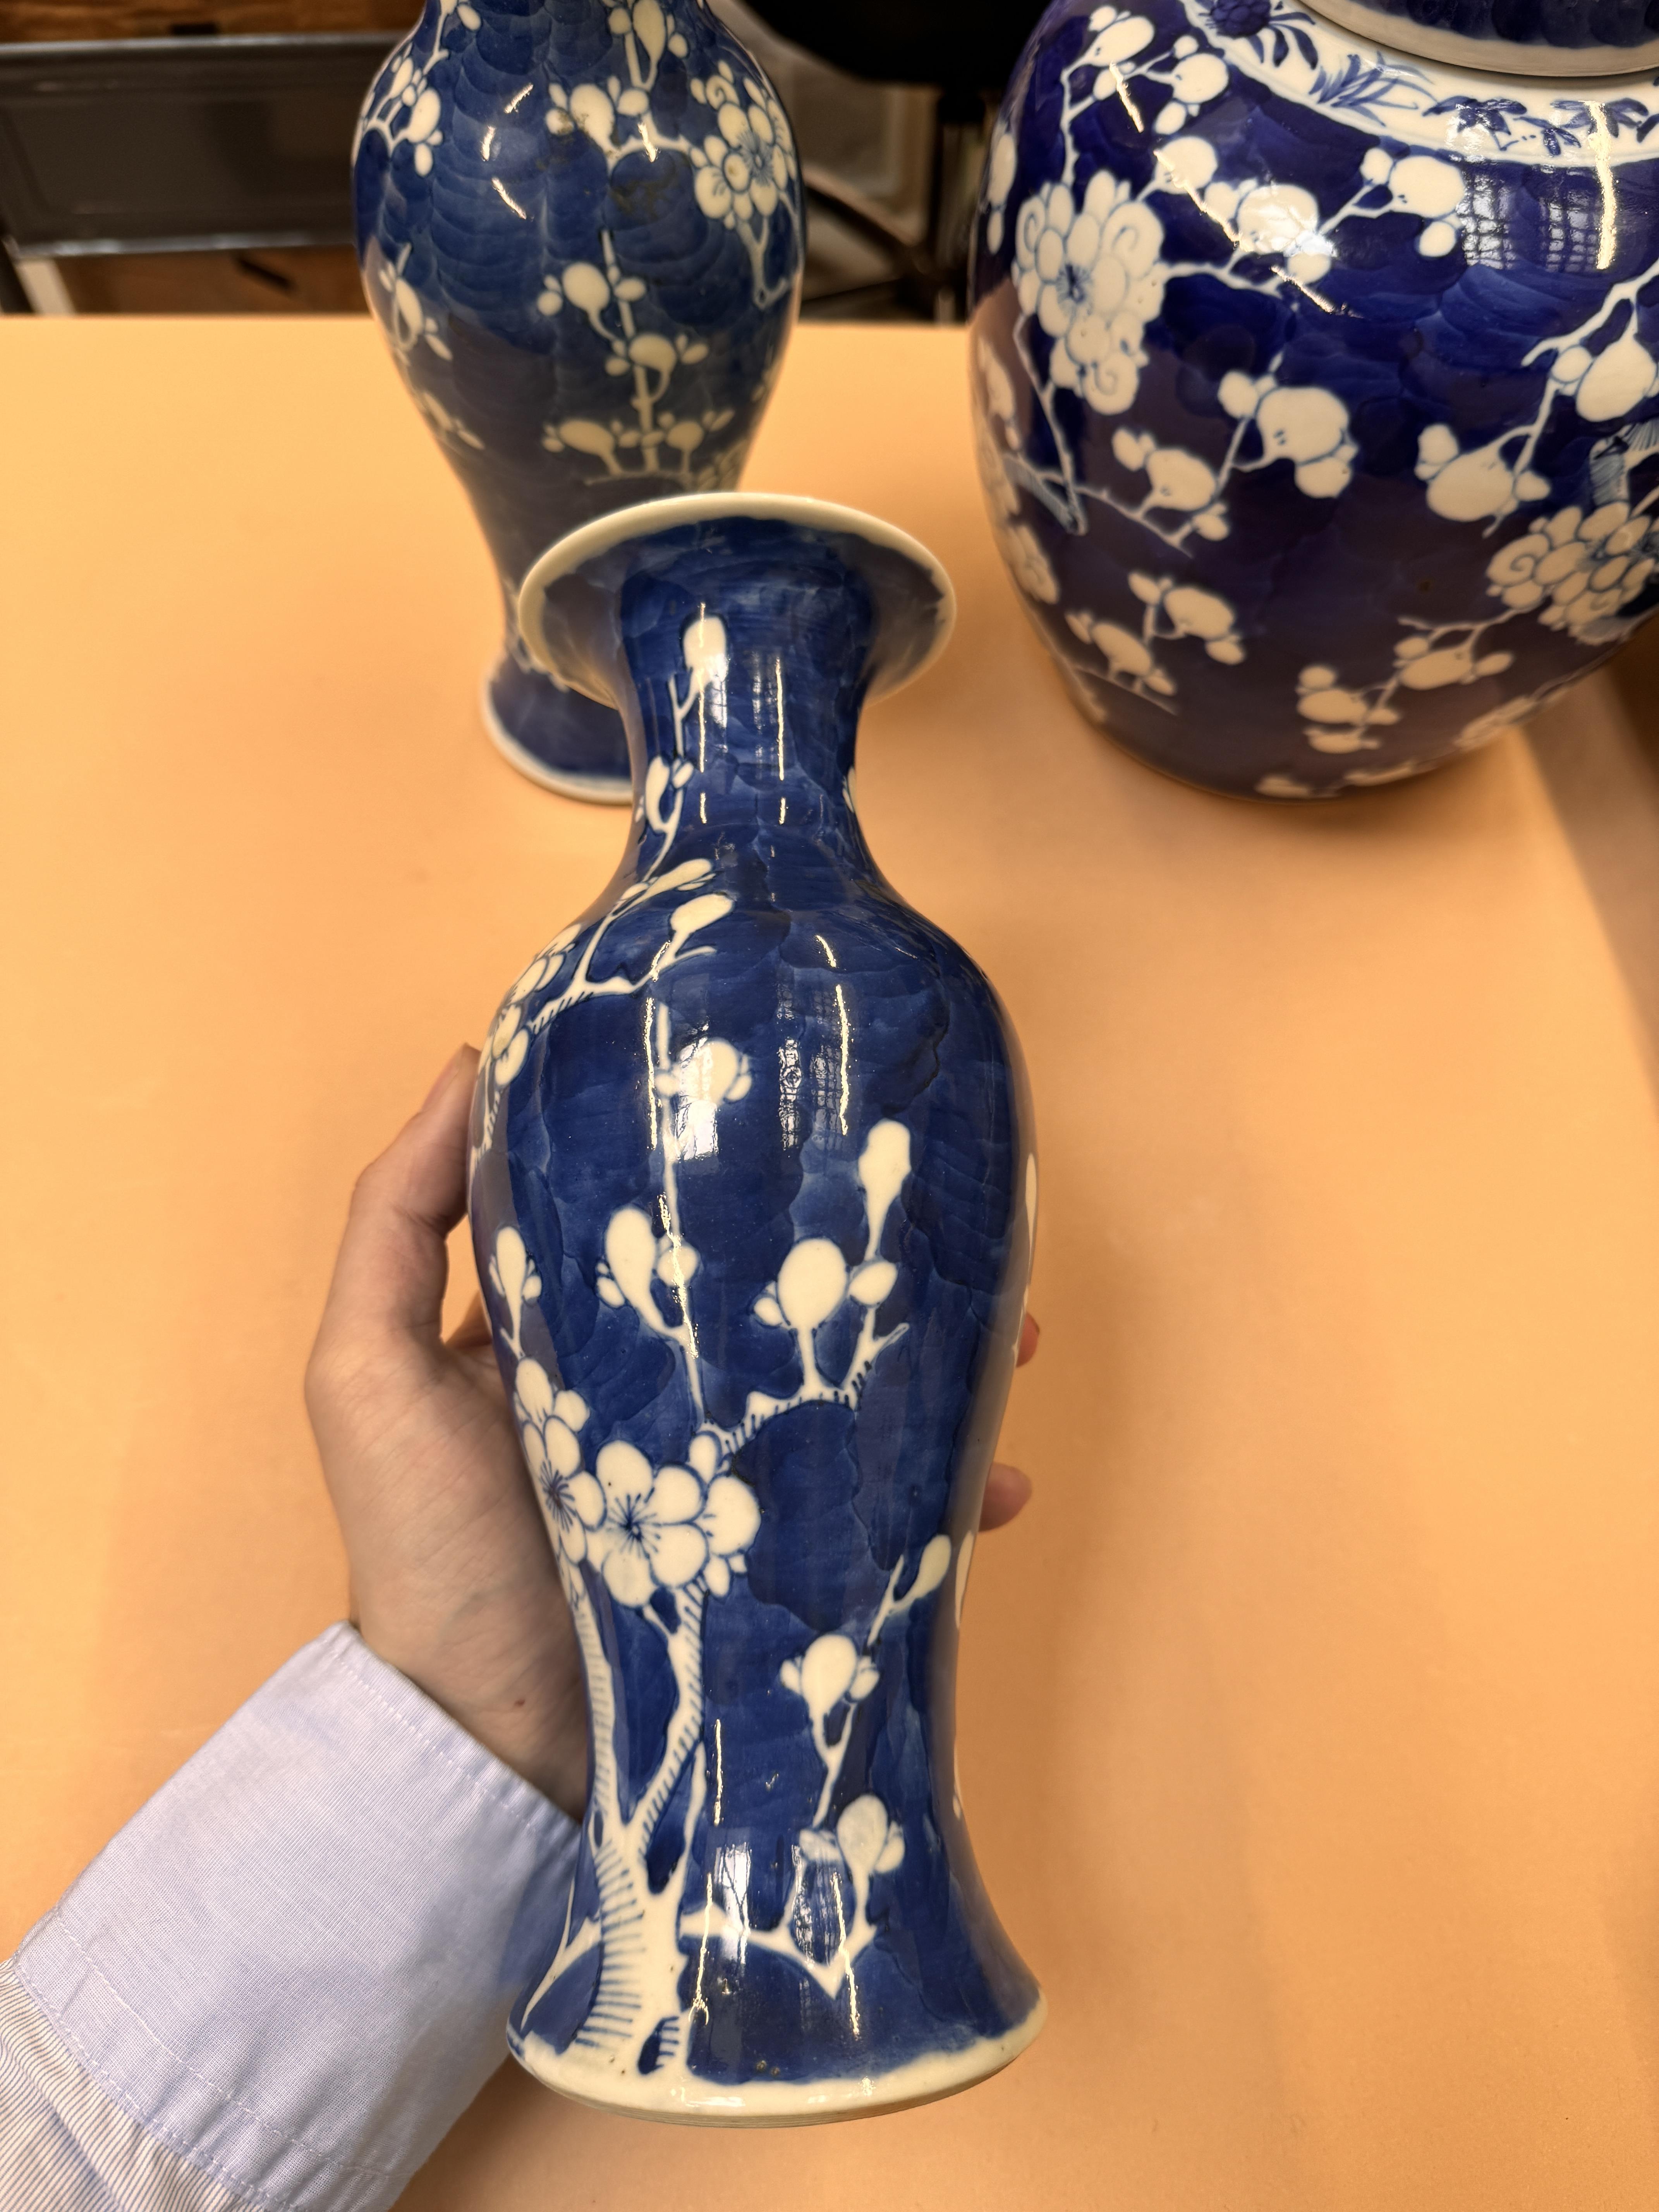 A CHINESE BLUE AND WHITE 'PRUNUS' JAR AND TWO VASES 清十九世紀 青花梅紋罐及瓶兩件 - Image 31 of 33